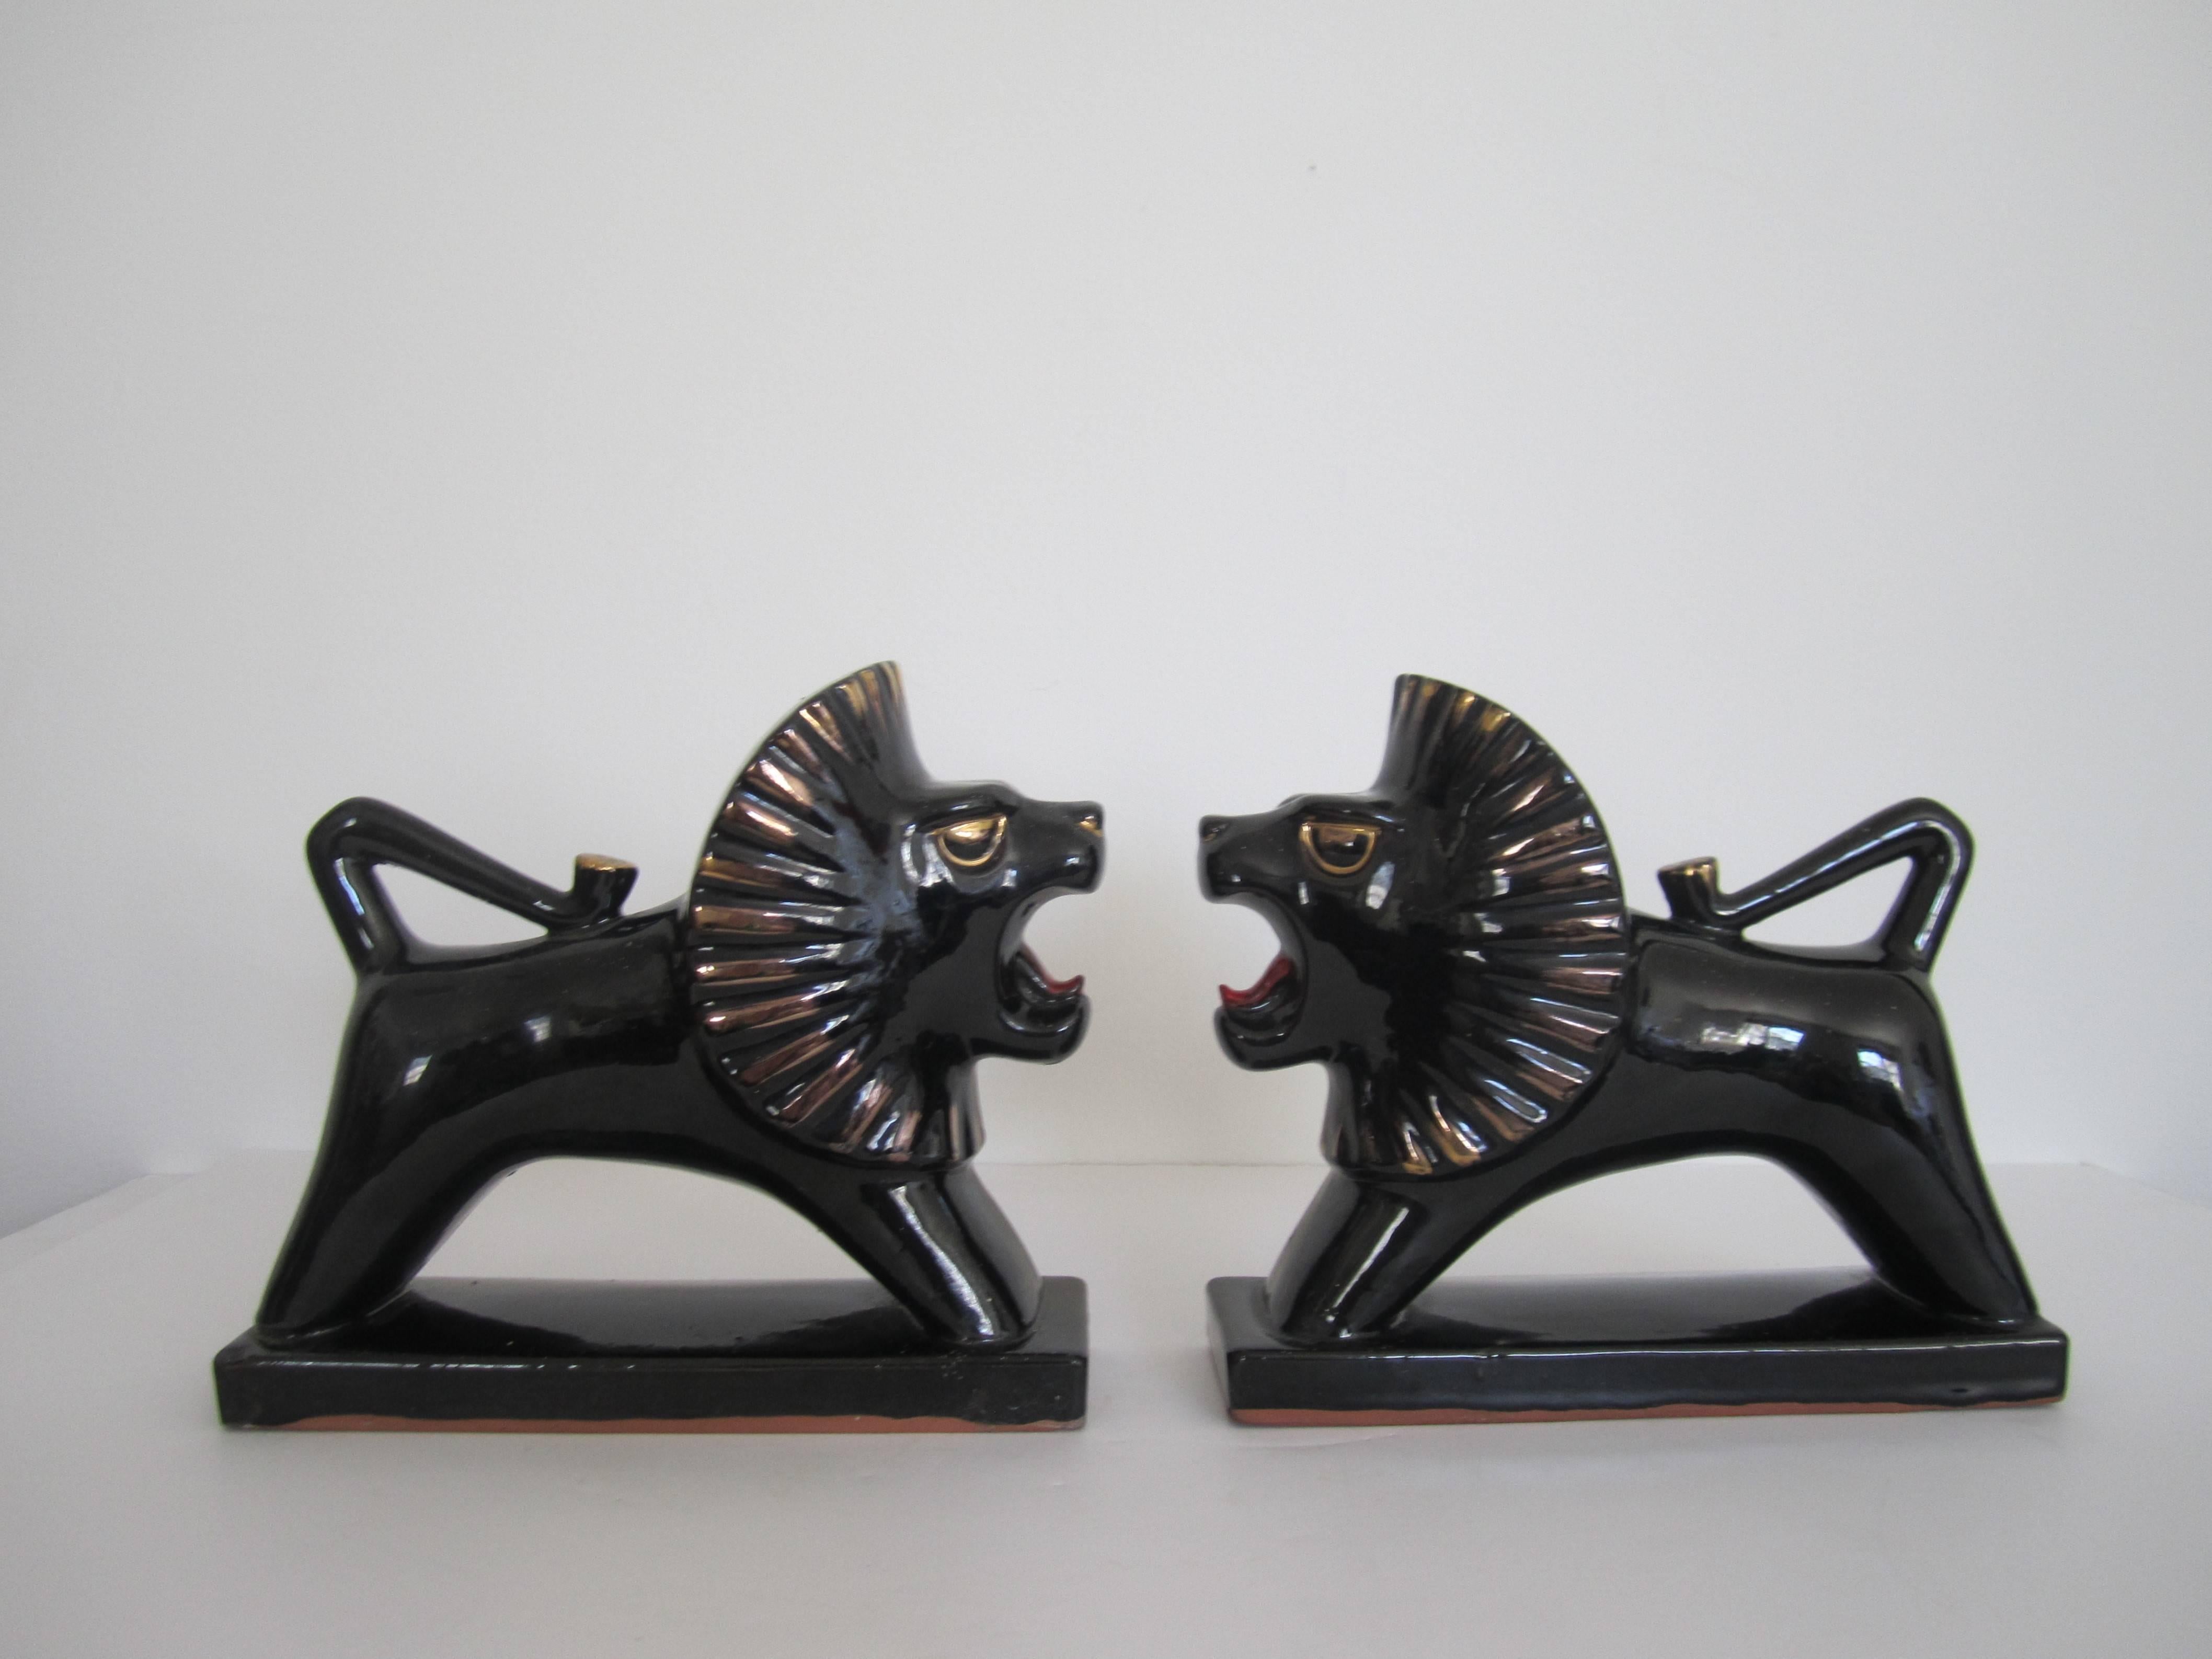 A vintage pair of Art Deco black and gold 'growling' Lion bookends or animal sculptures/decorative objects in black and gold and with red tongues. Pair are glazed terracotta. Dimensions: 6.5